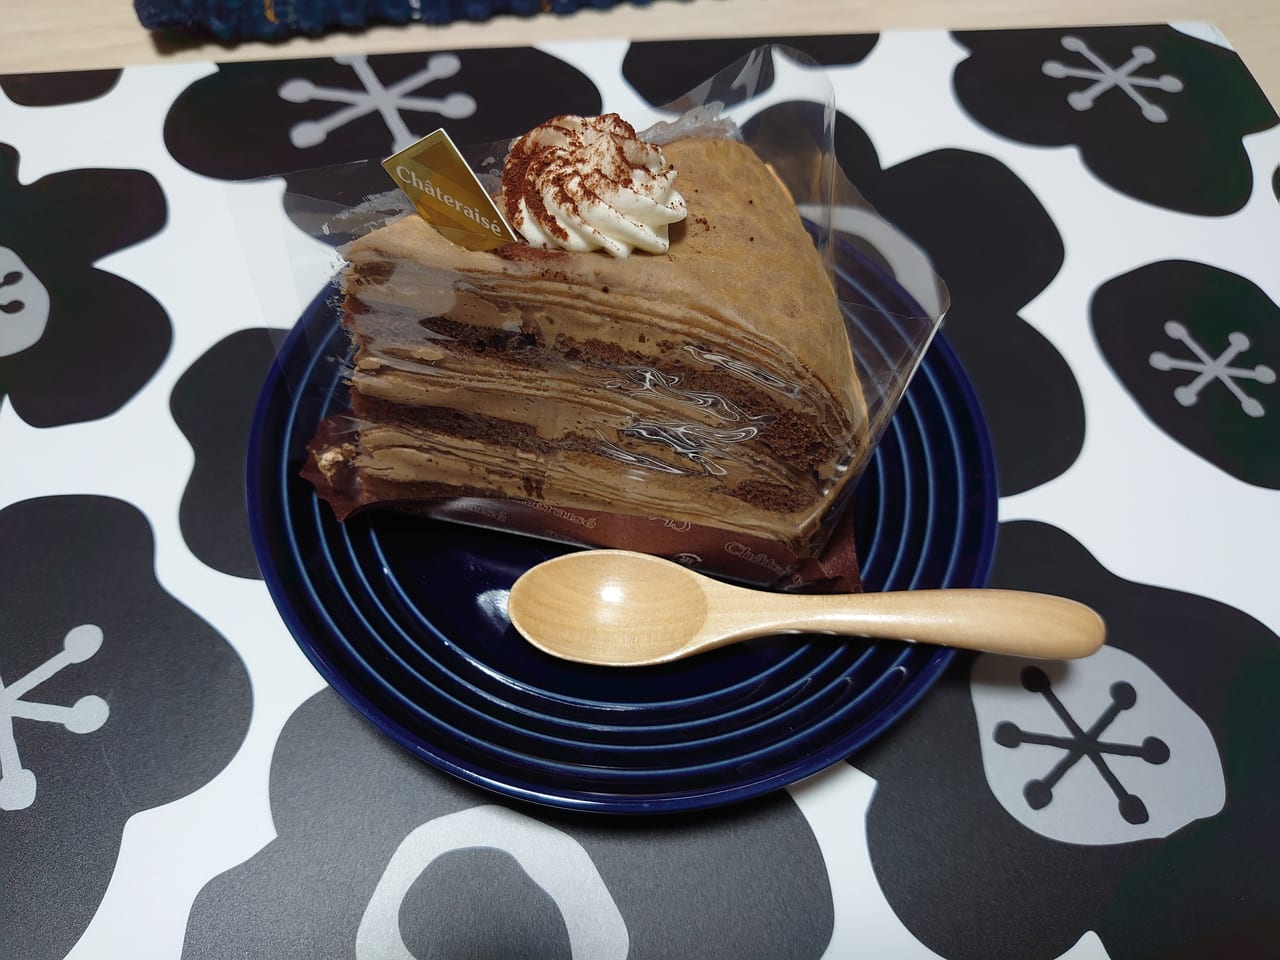 Chateraiseのケーキ